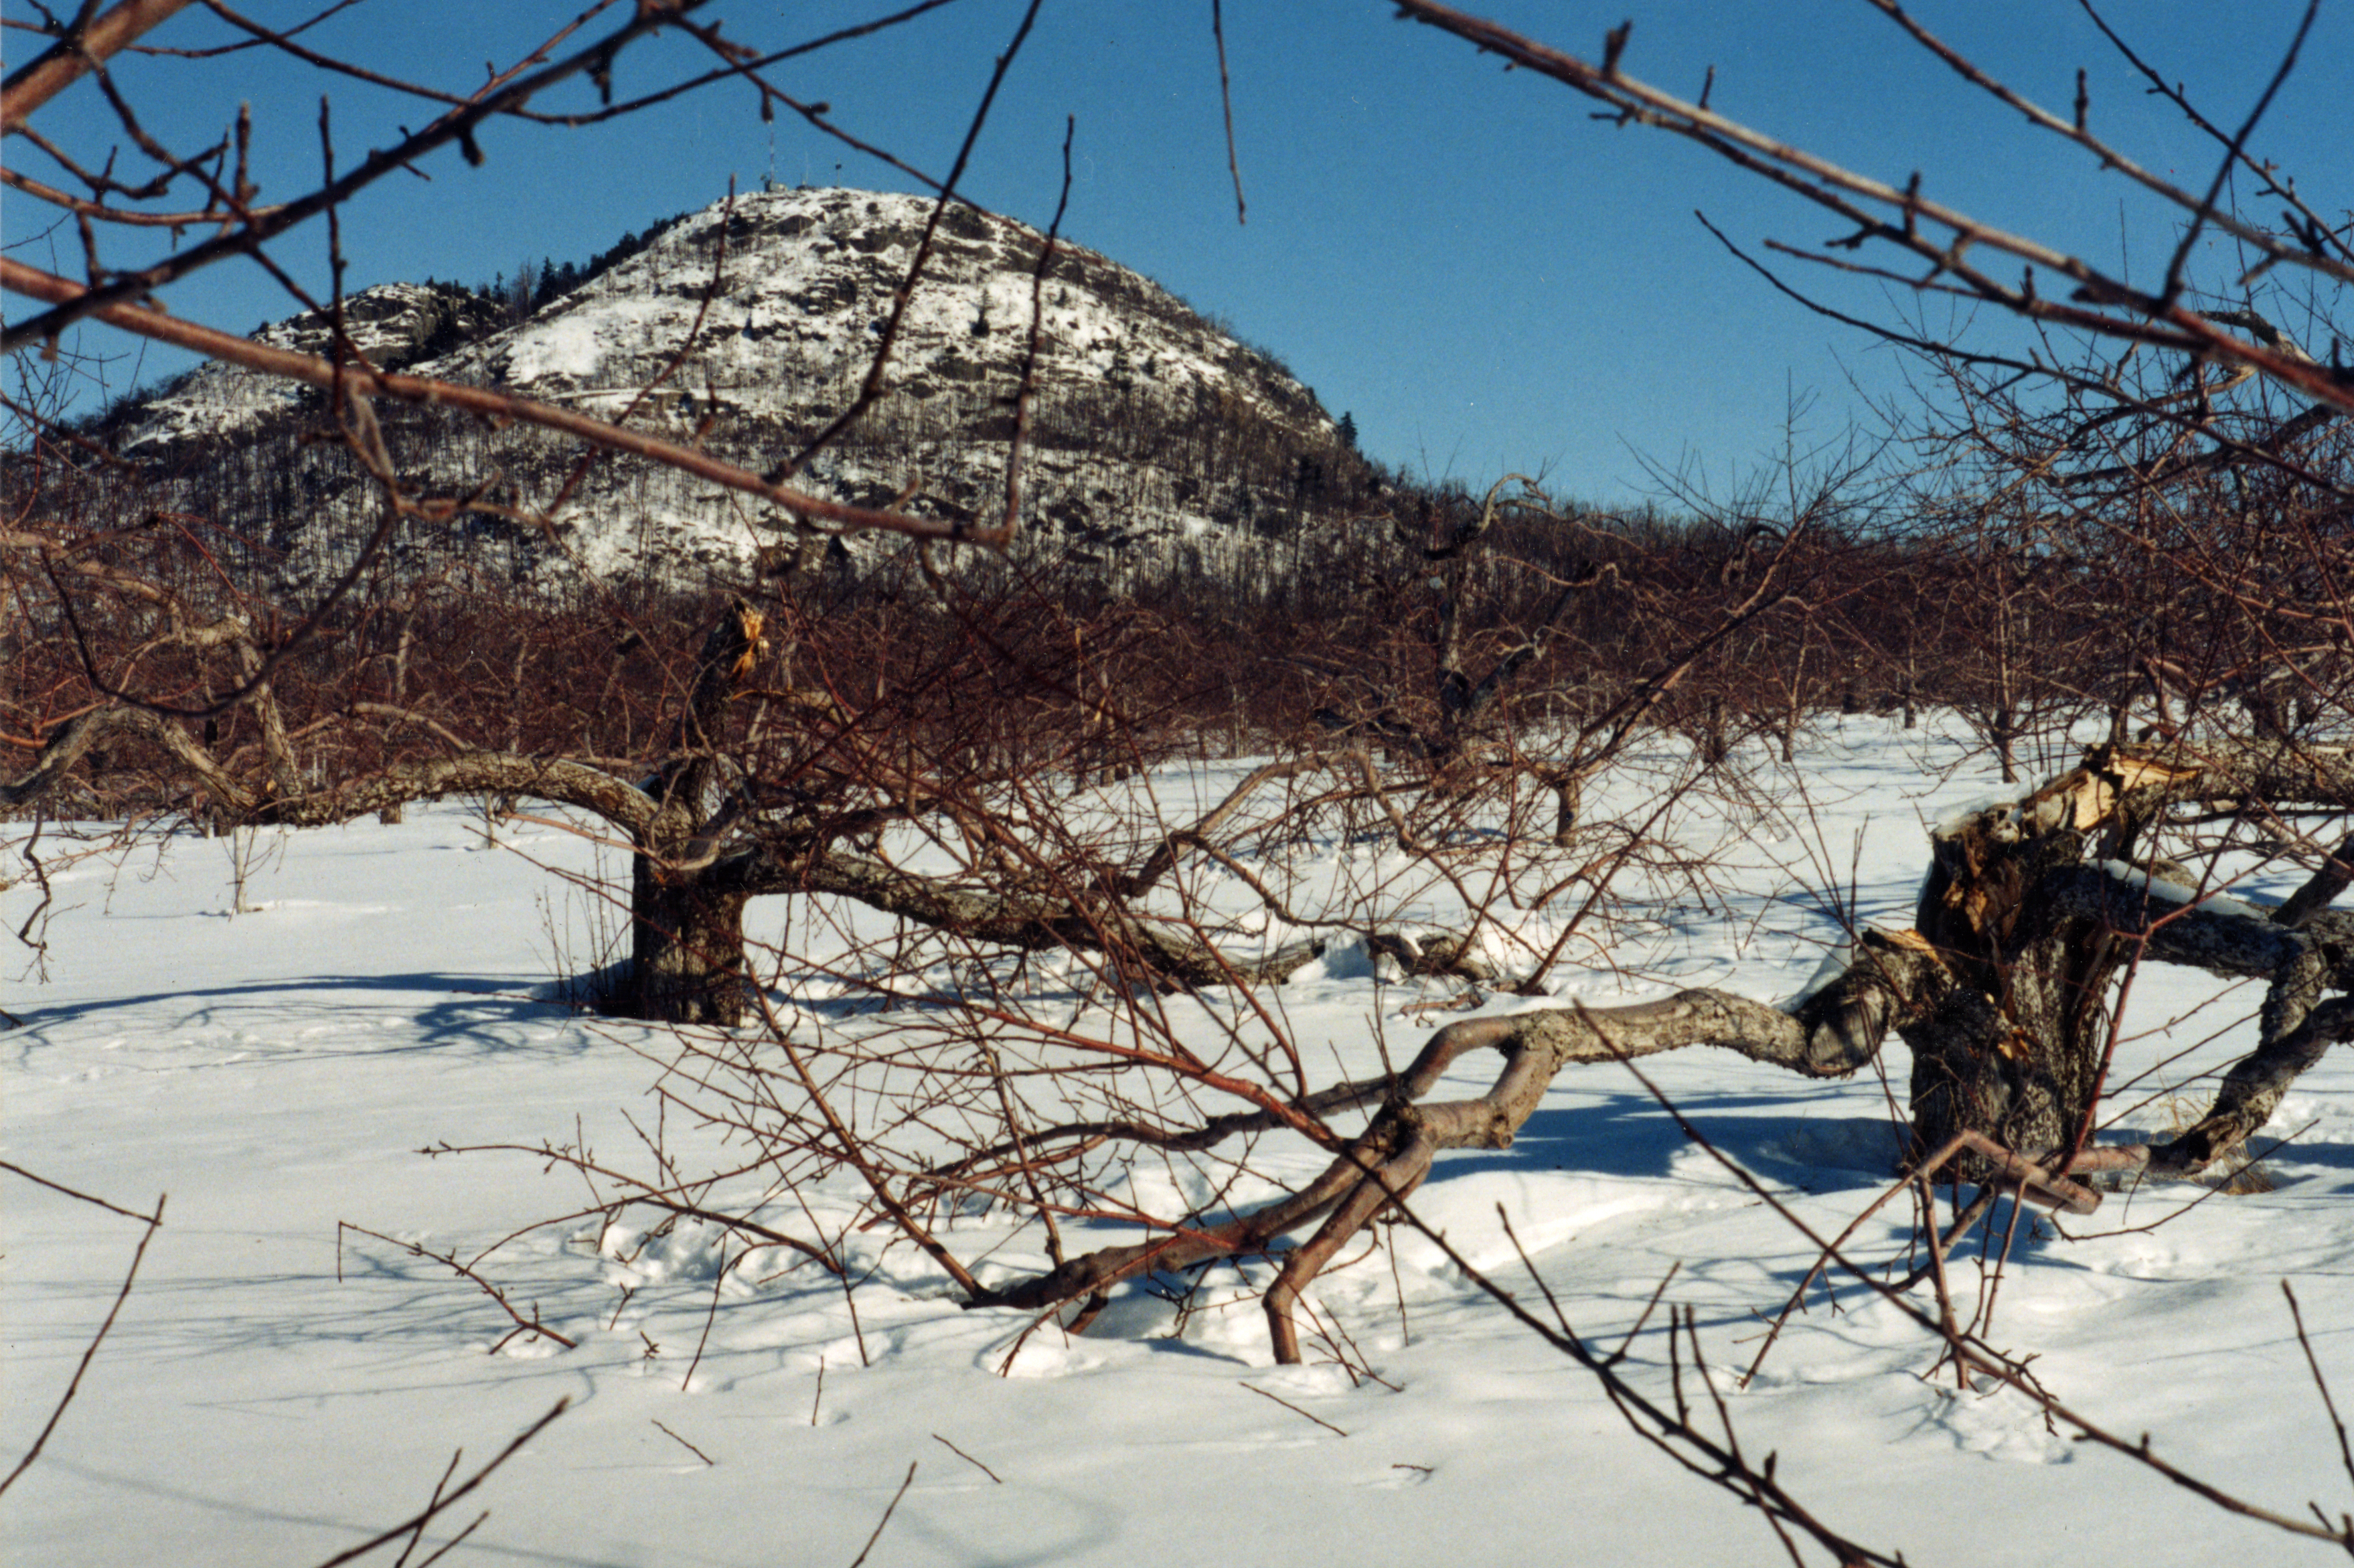 The appletrees broke under the weight of the ice at Mont-Saint-Grégoire.